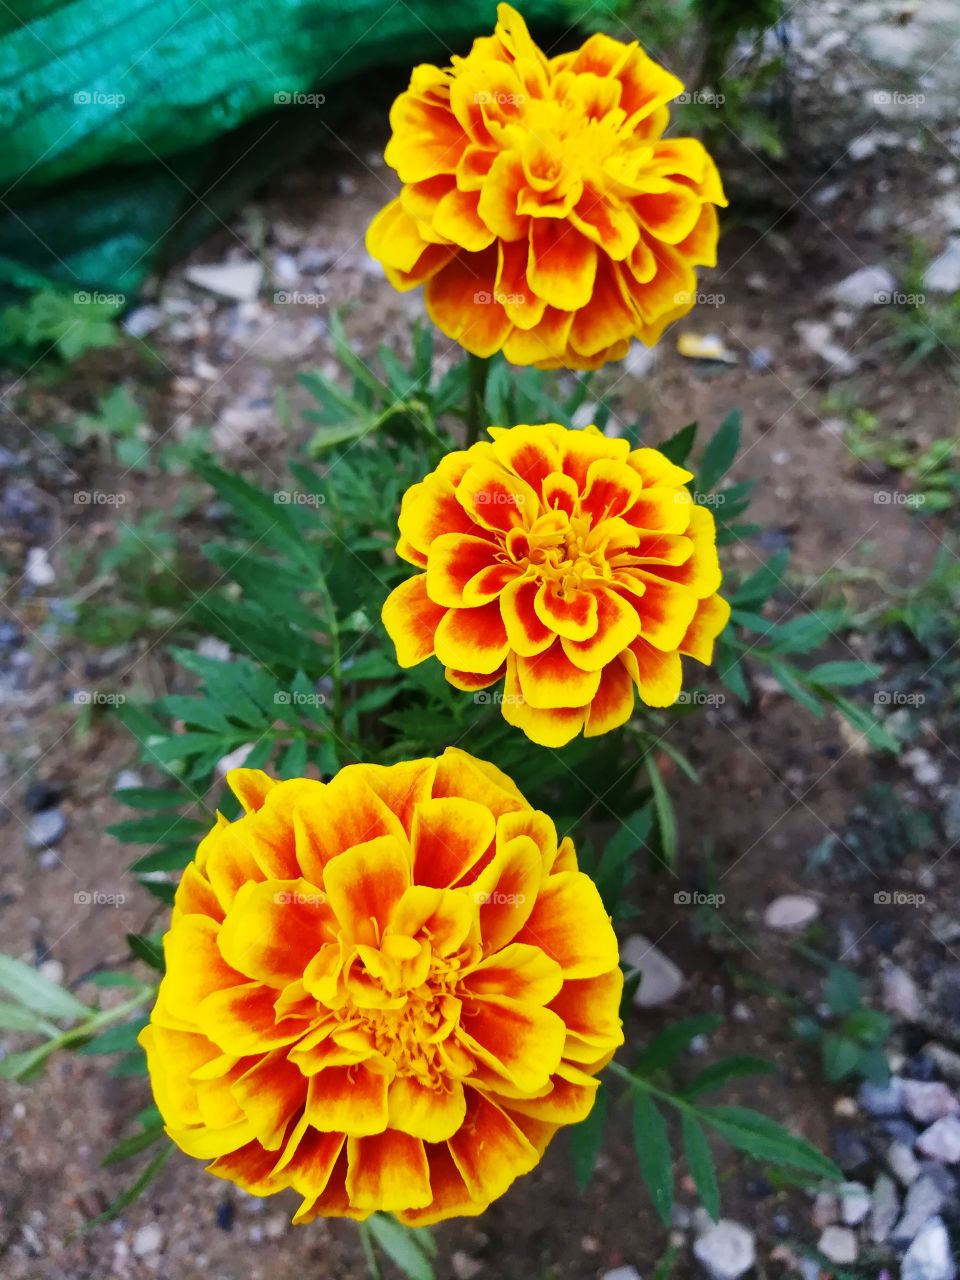 Beautiful marigold in the garden. Vivid yellow flowers in cloudy morning